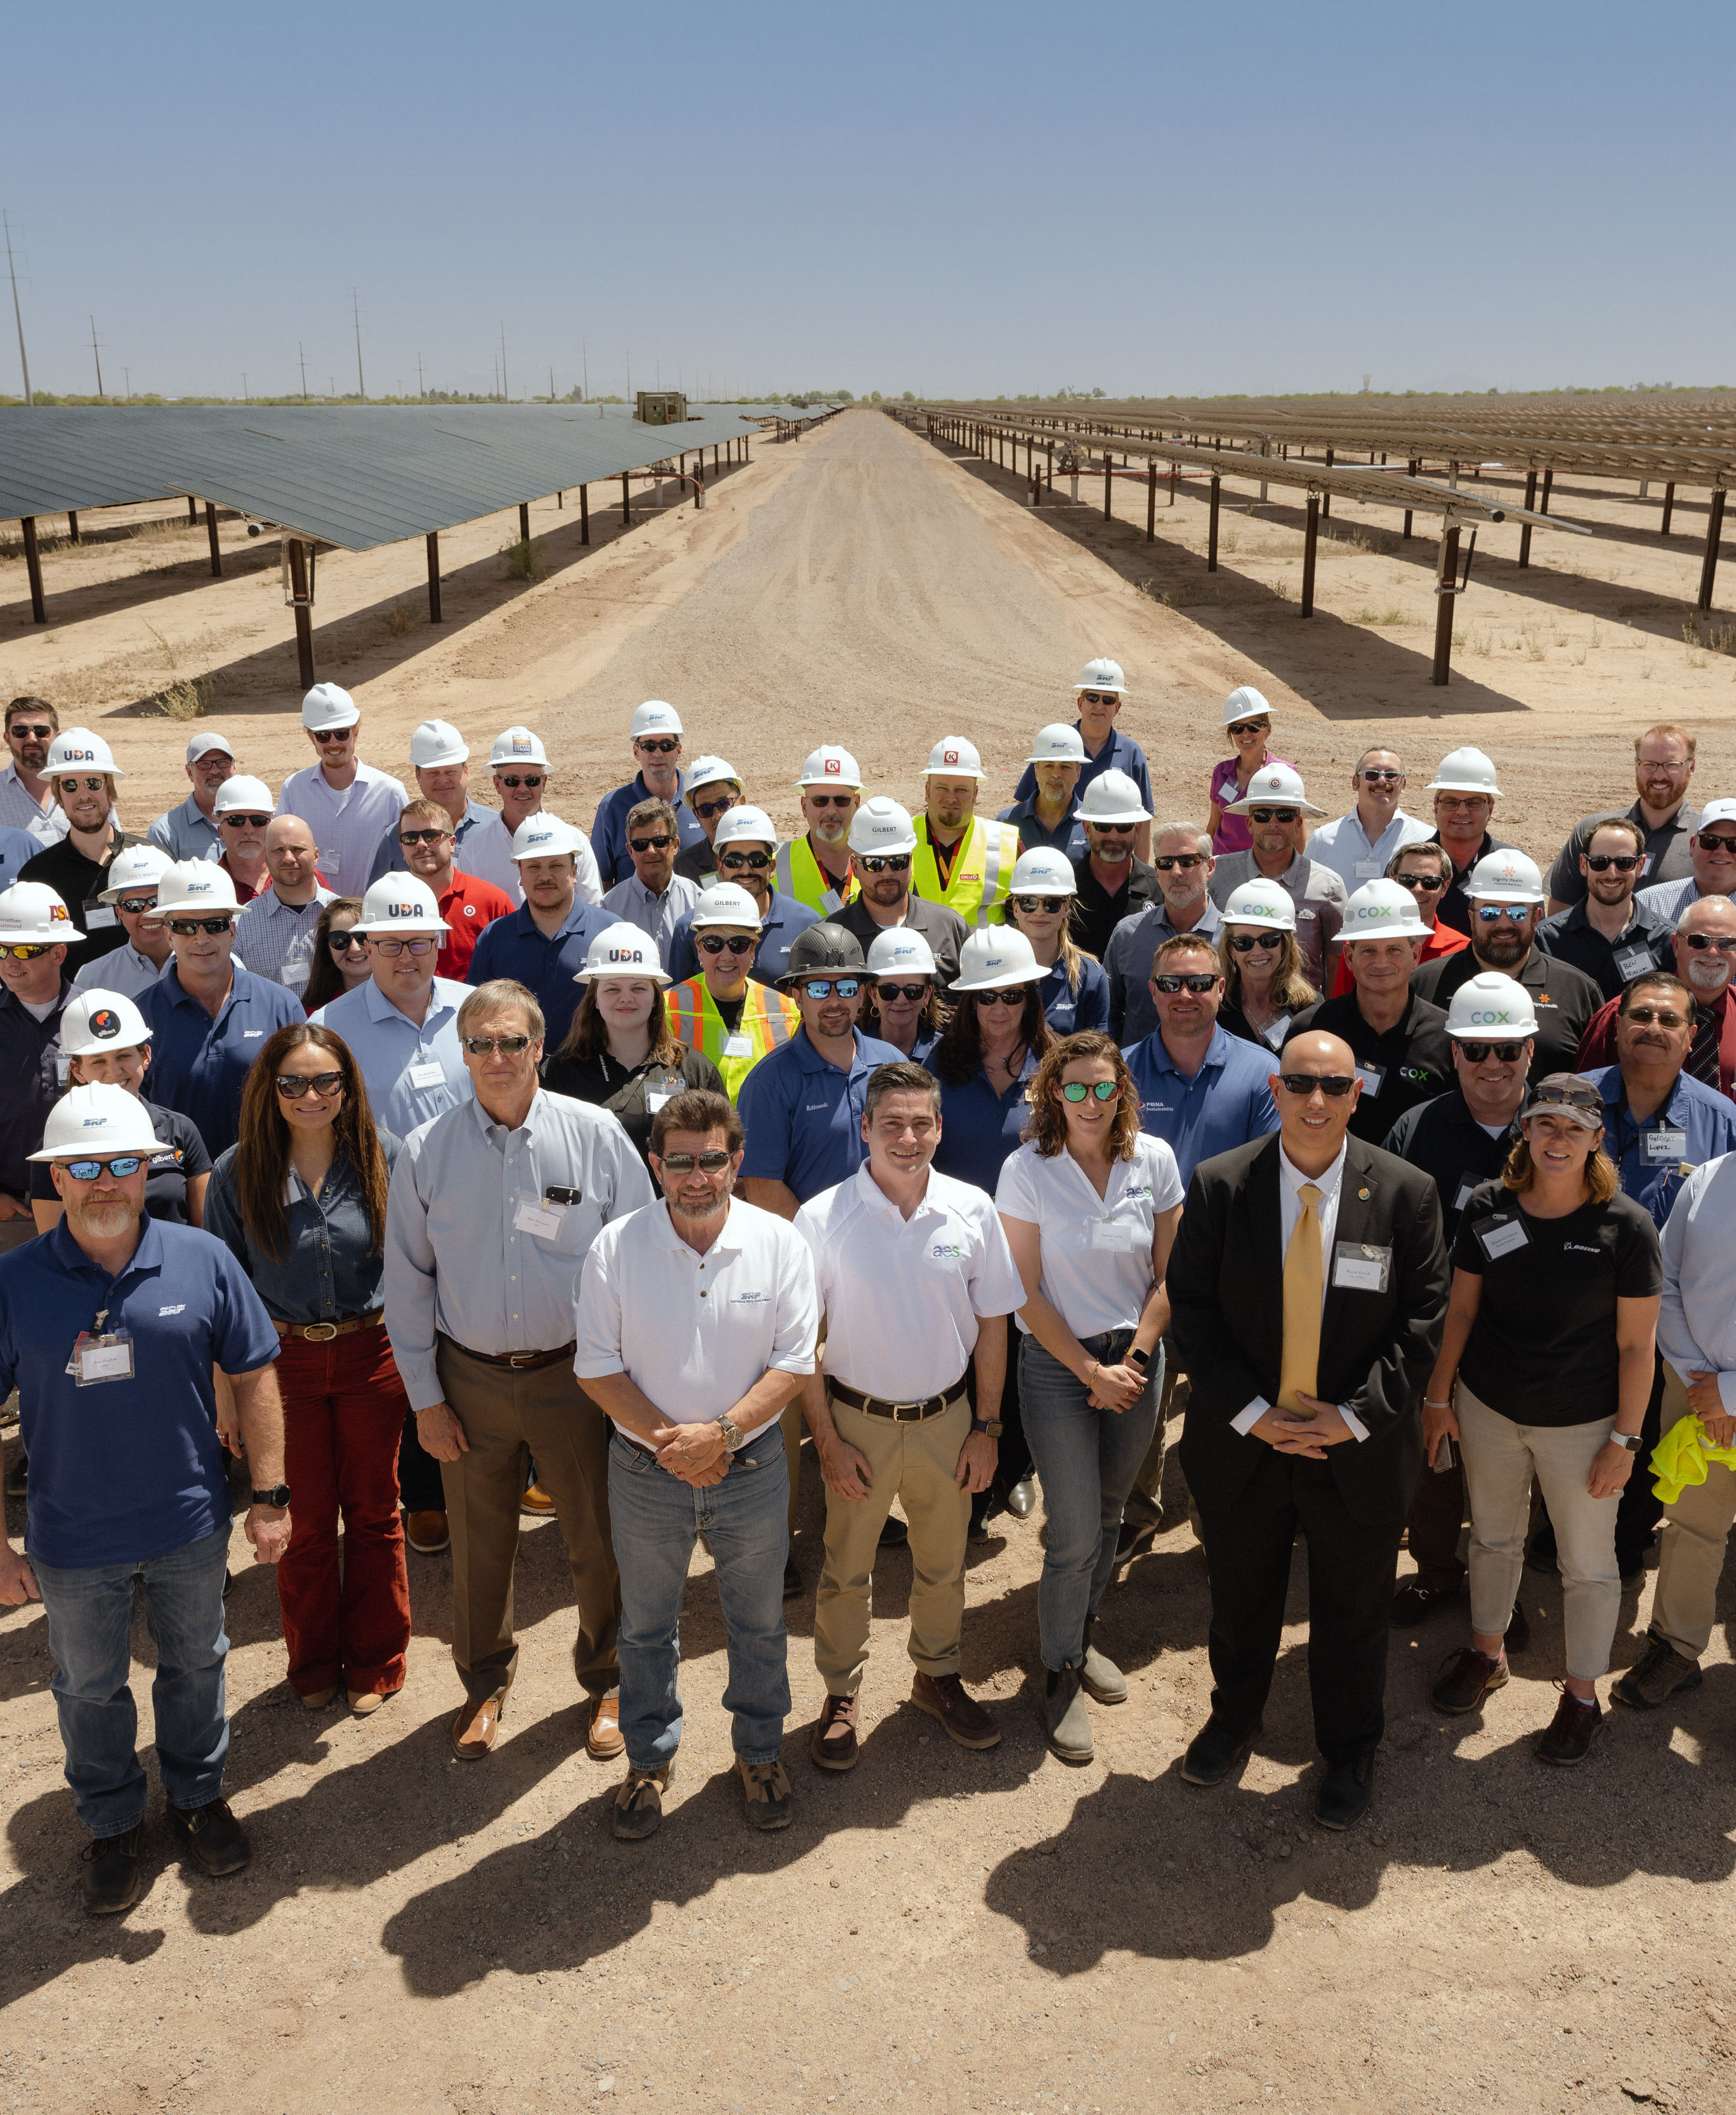 A large group of people standing in front of solar panels